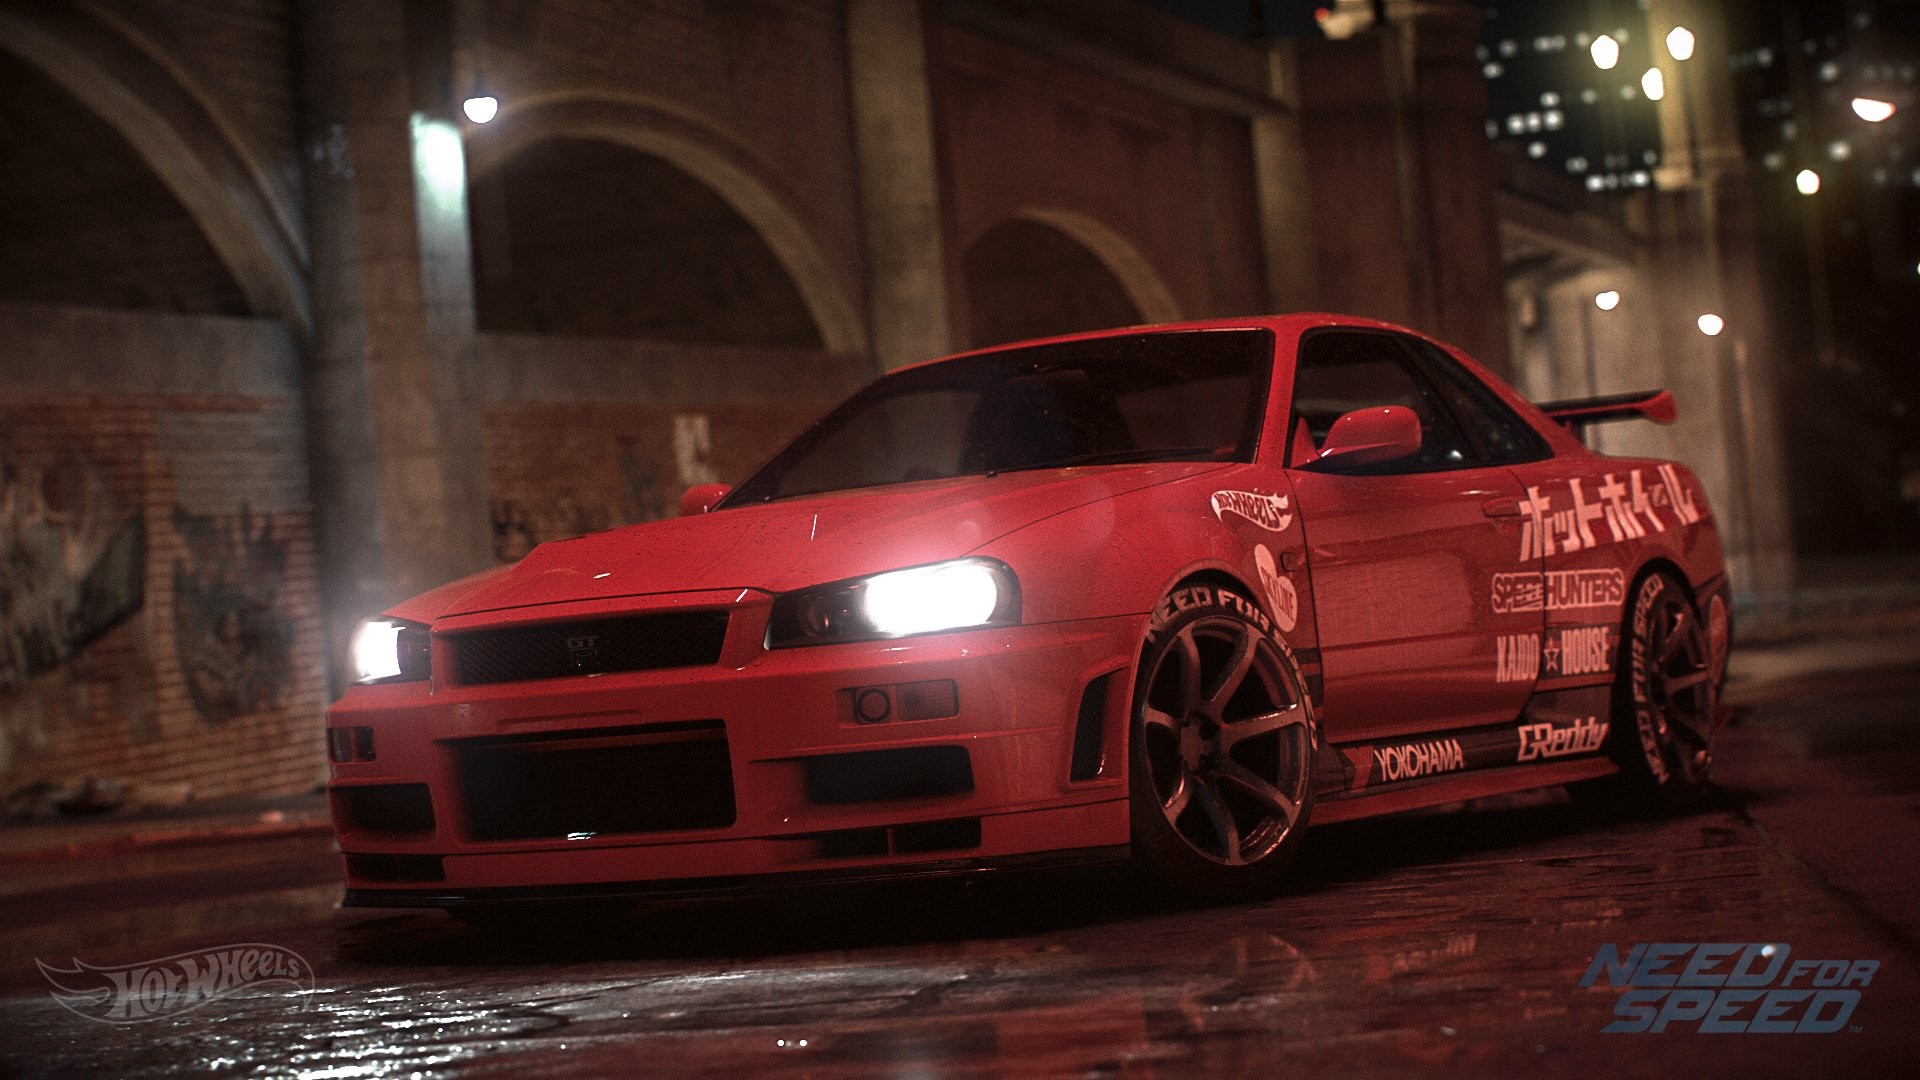 General 1920x1080 car vehicle red cars video games Need for Speed Nissan Nissan Skyline R34